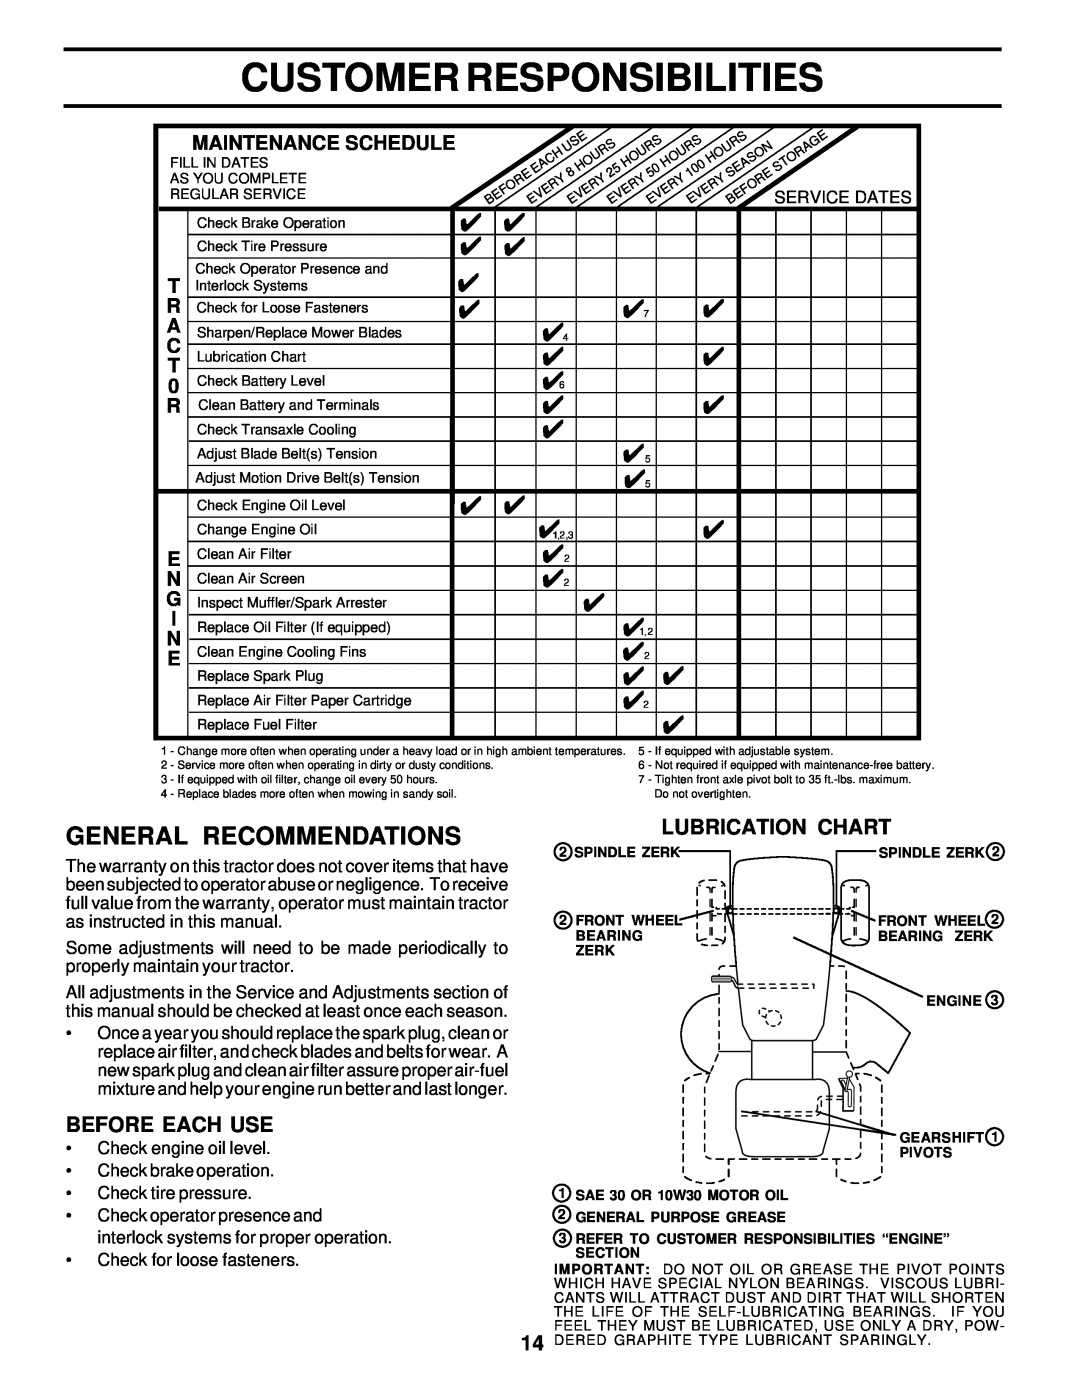 Poulan PRK17G42STA owner manual Customer Responsibilities, General Recommendations, Lubrication Chart, Before Each Use 